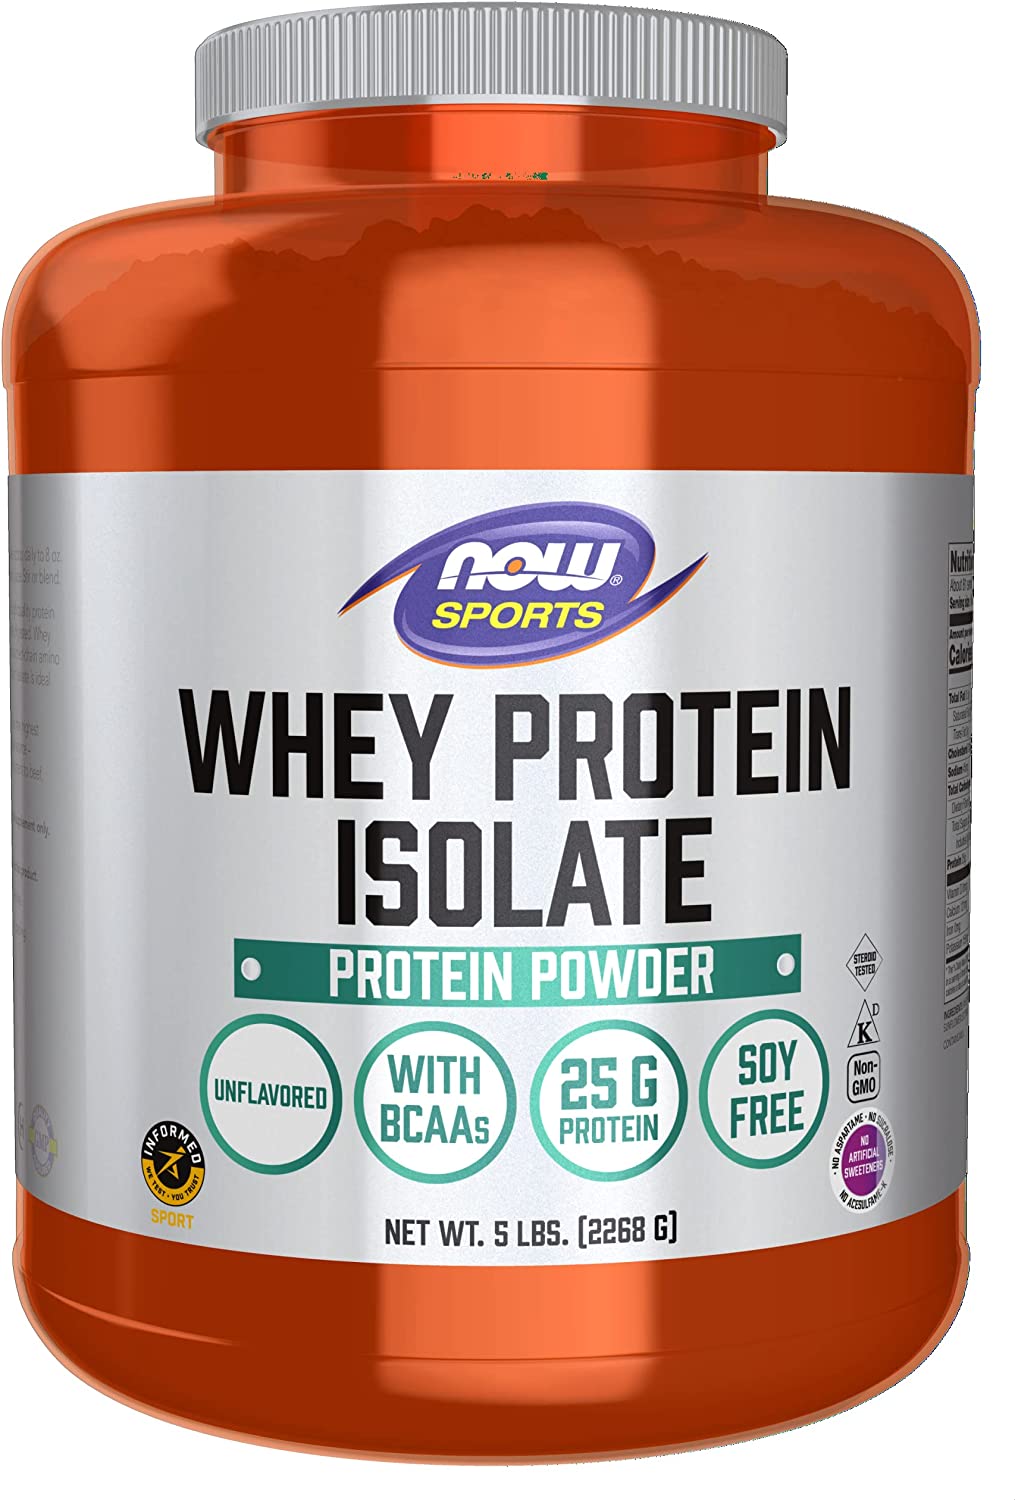 NOW Sports Soy-Free Whey Protein Isolate Powder, Unflavored